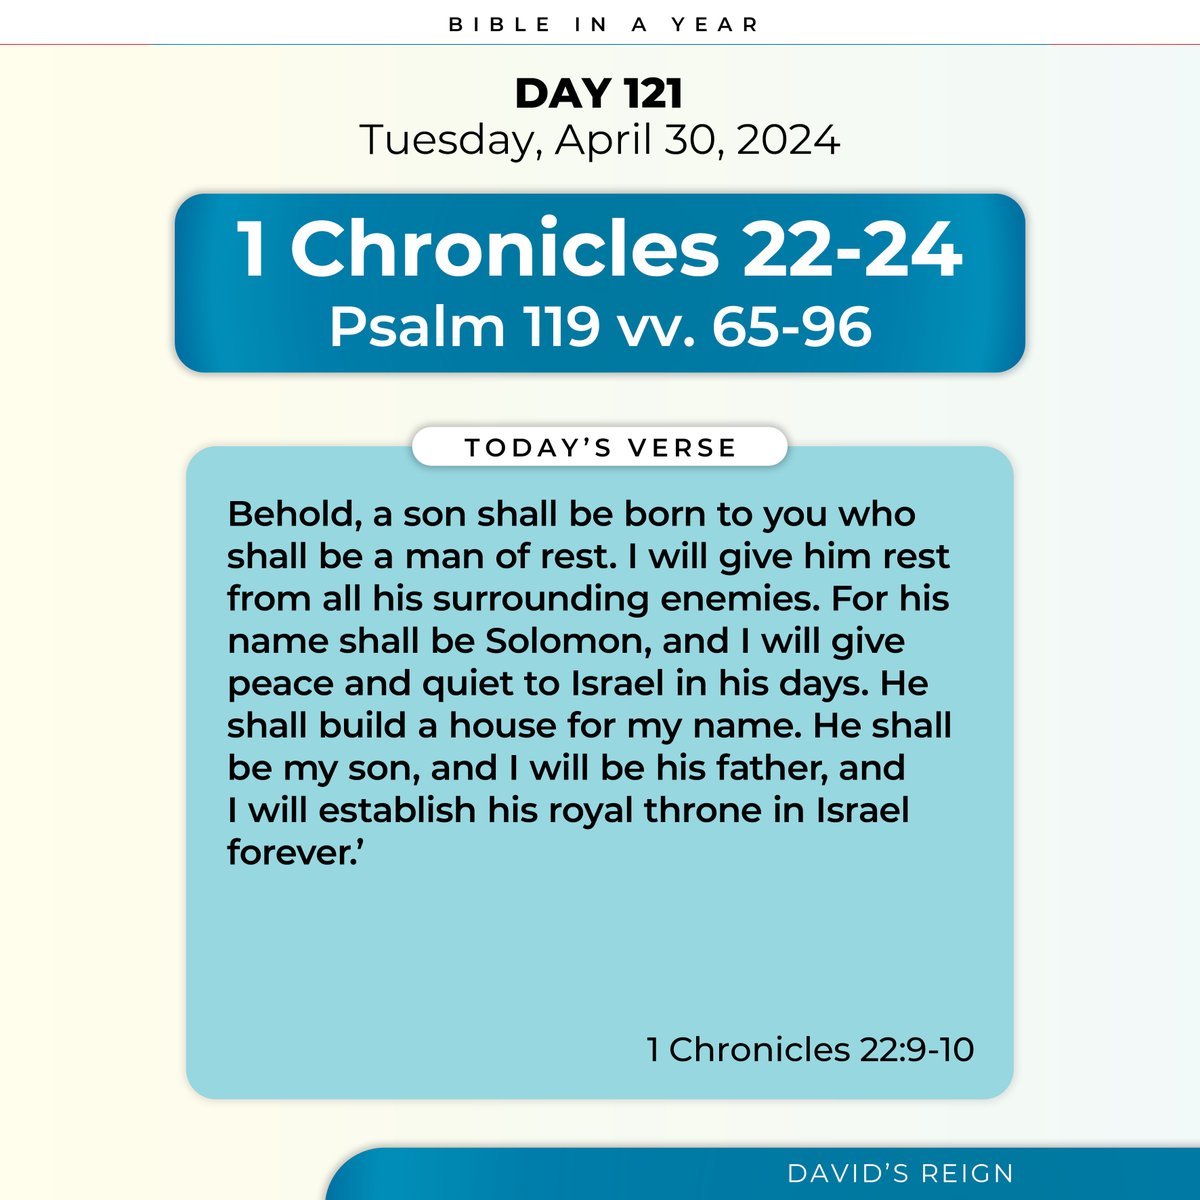 DAY 121 [1 Chronicles 22-24, Psalm 119 vv. 65-96] #BibleinaYear | #biblestudy | #Bible | #SearchTheScriptures | #April2024